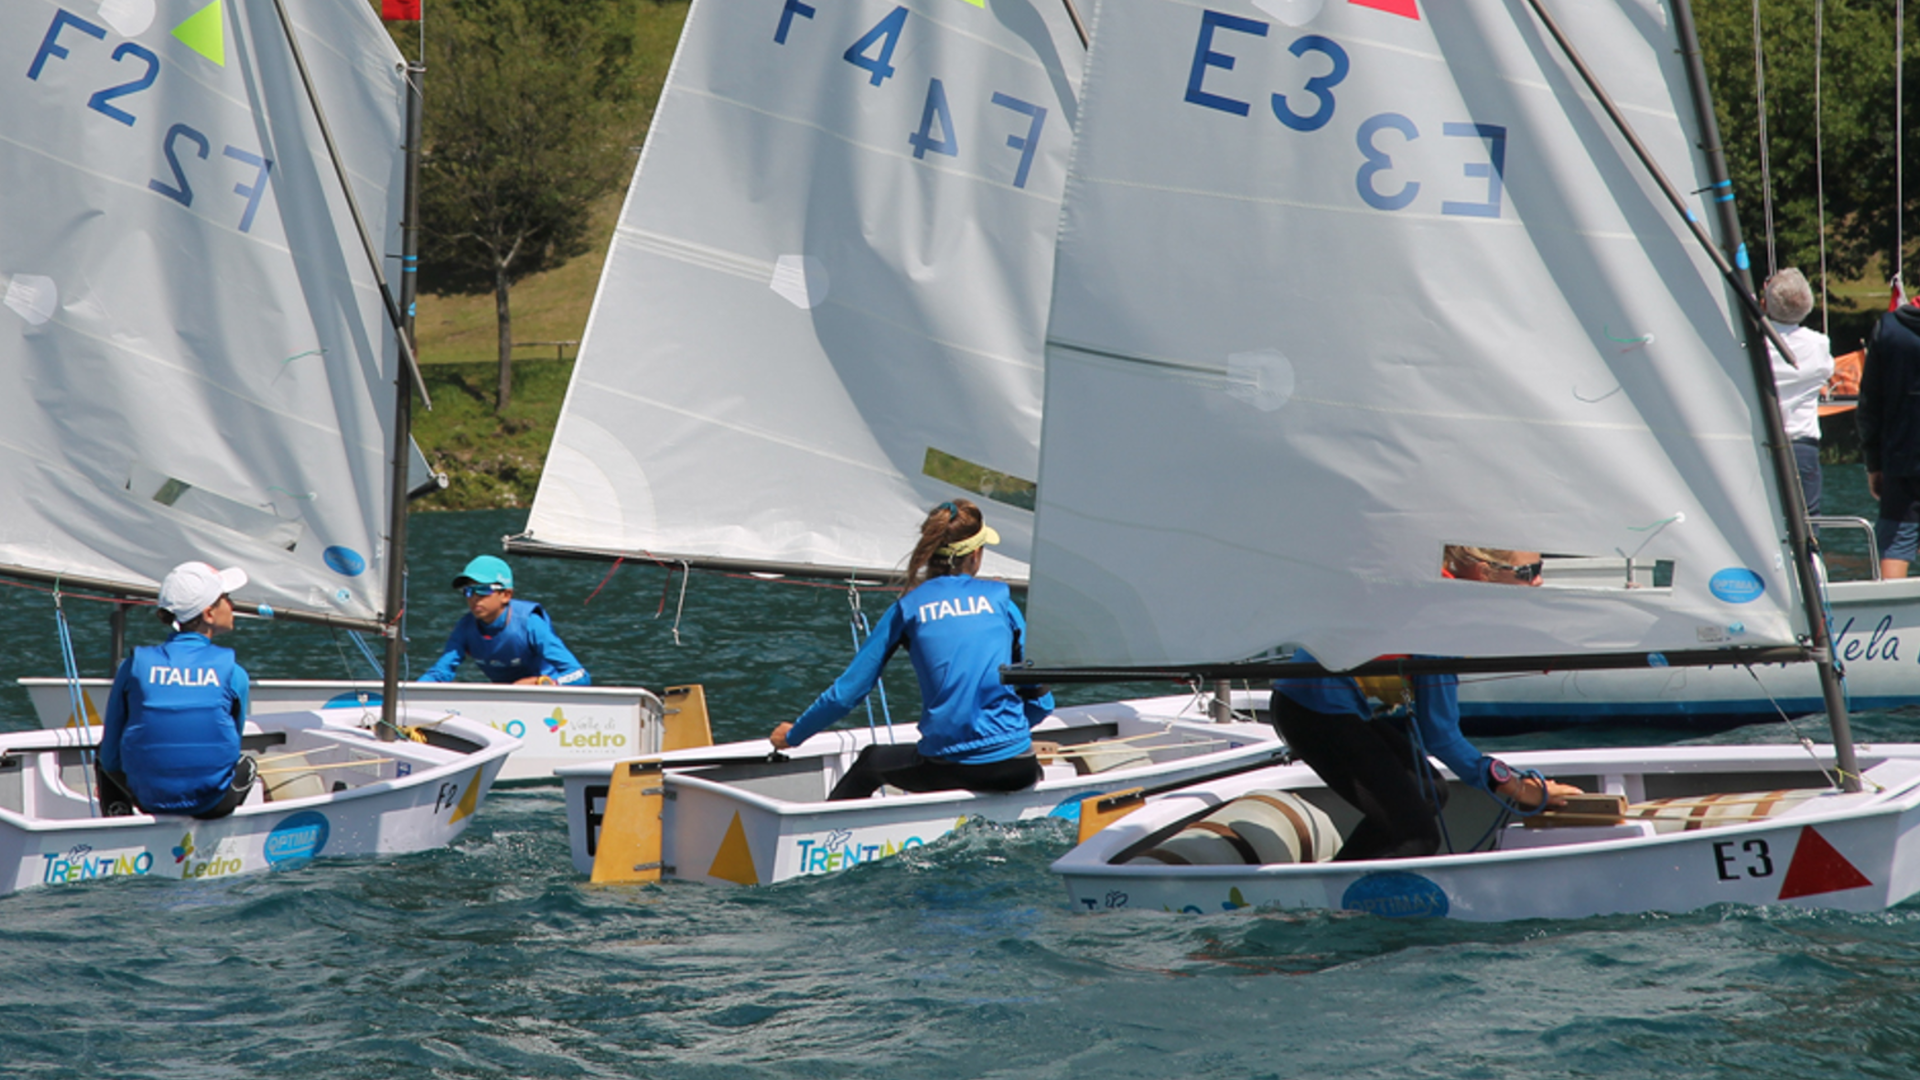 images/immagini/immagini_news/Europeo-optimist-day3.png